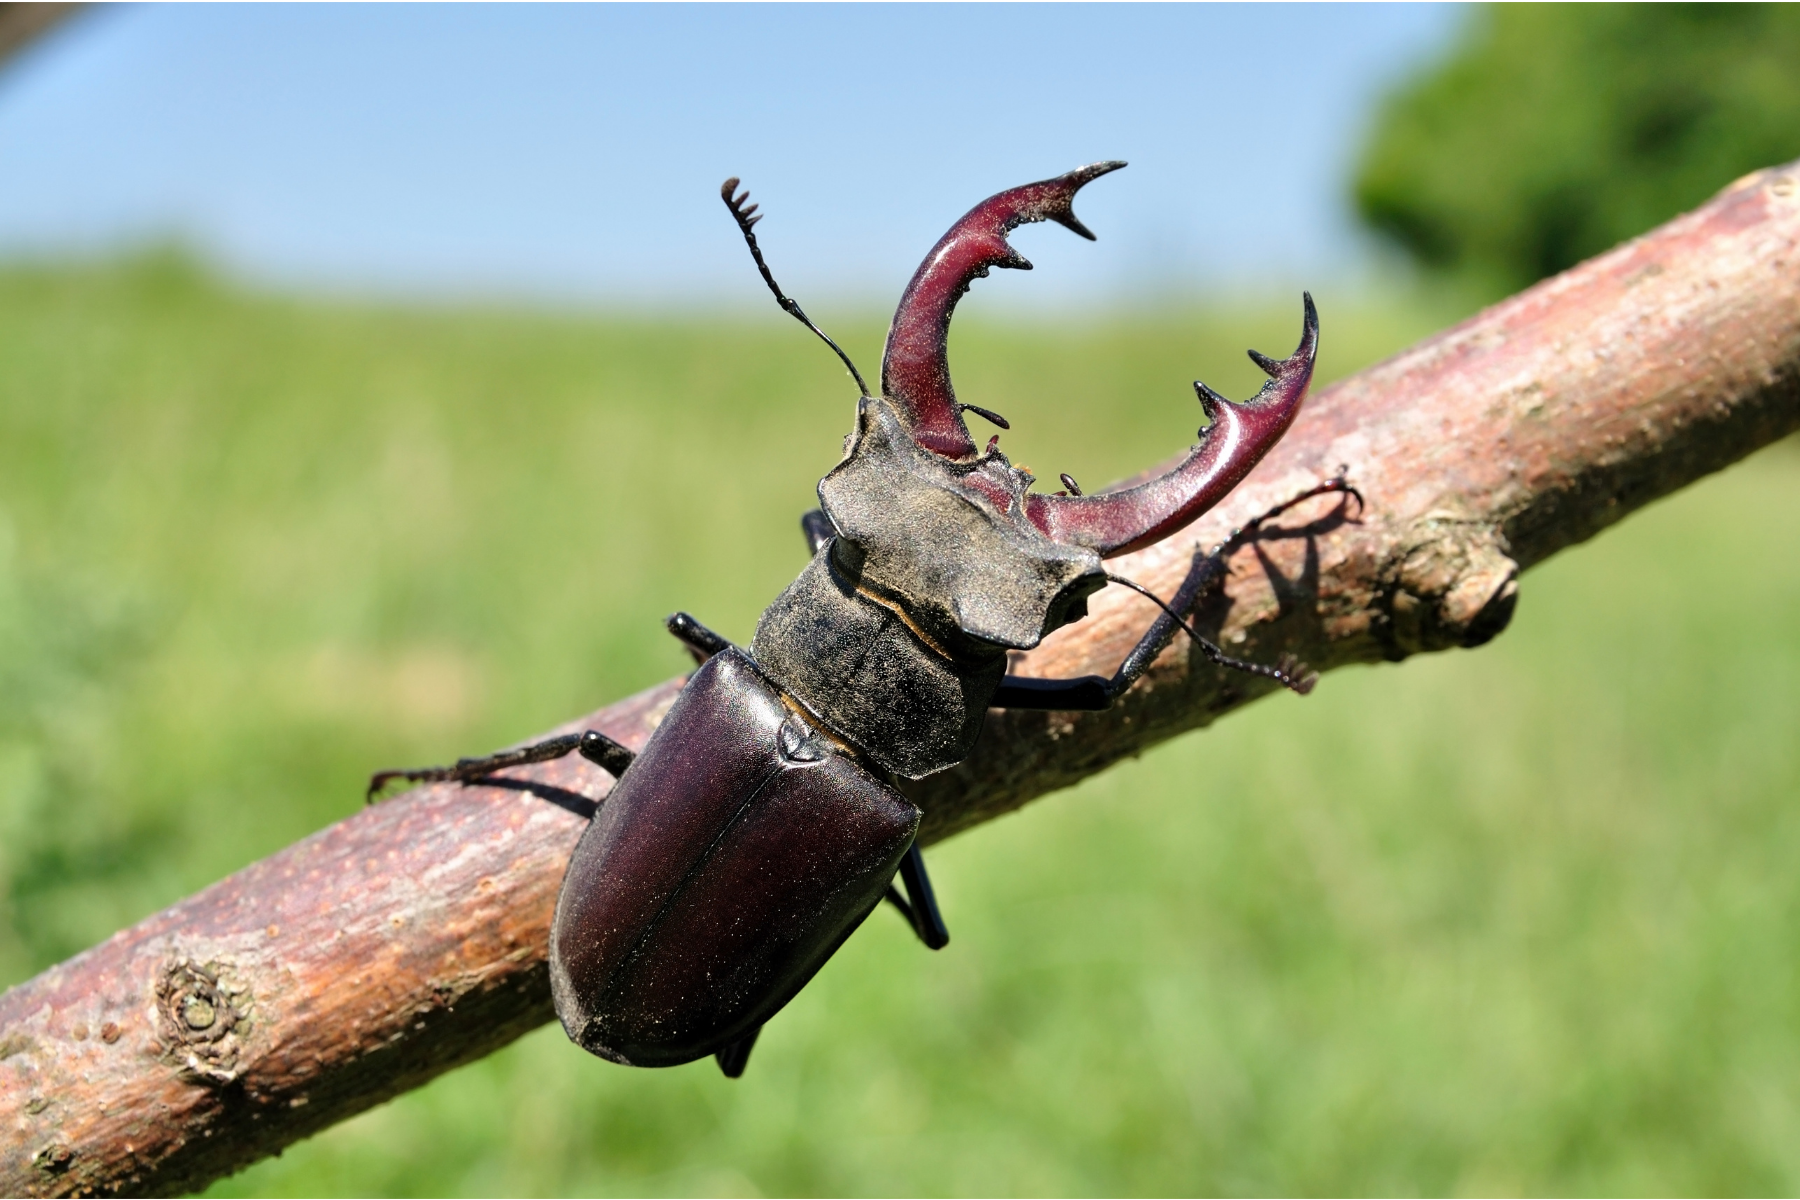 Large stag beetle on a branch.